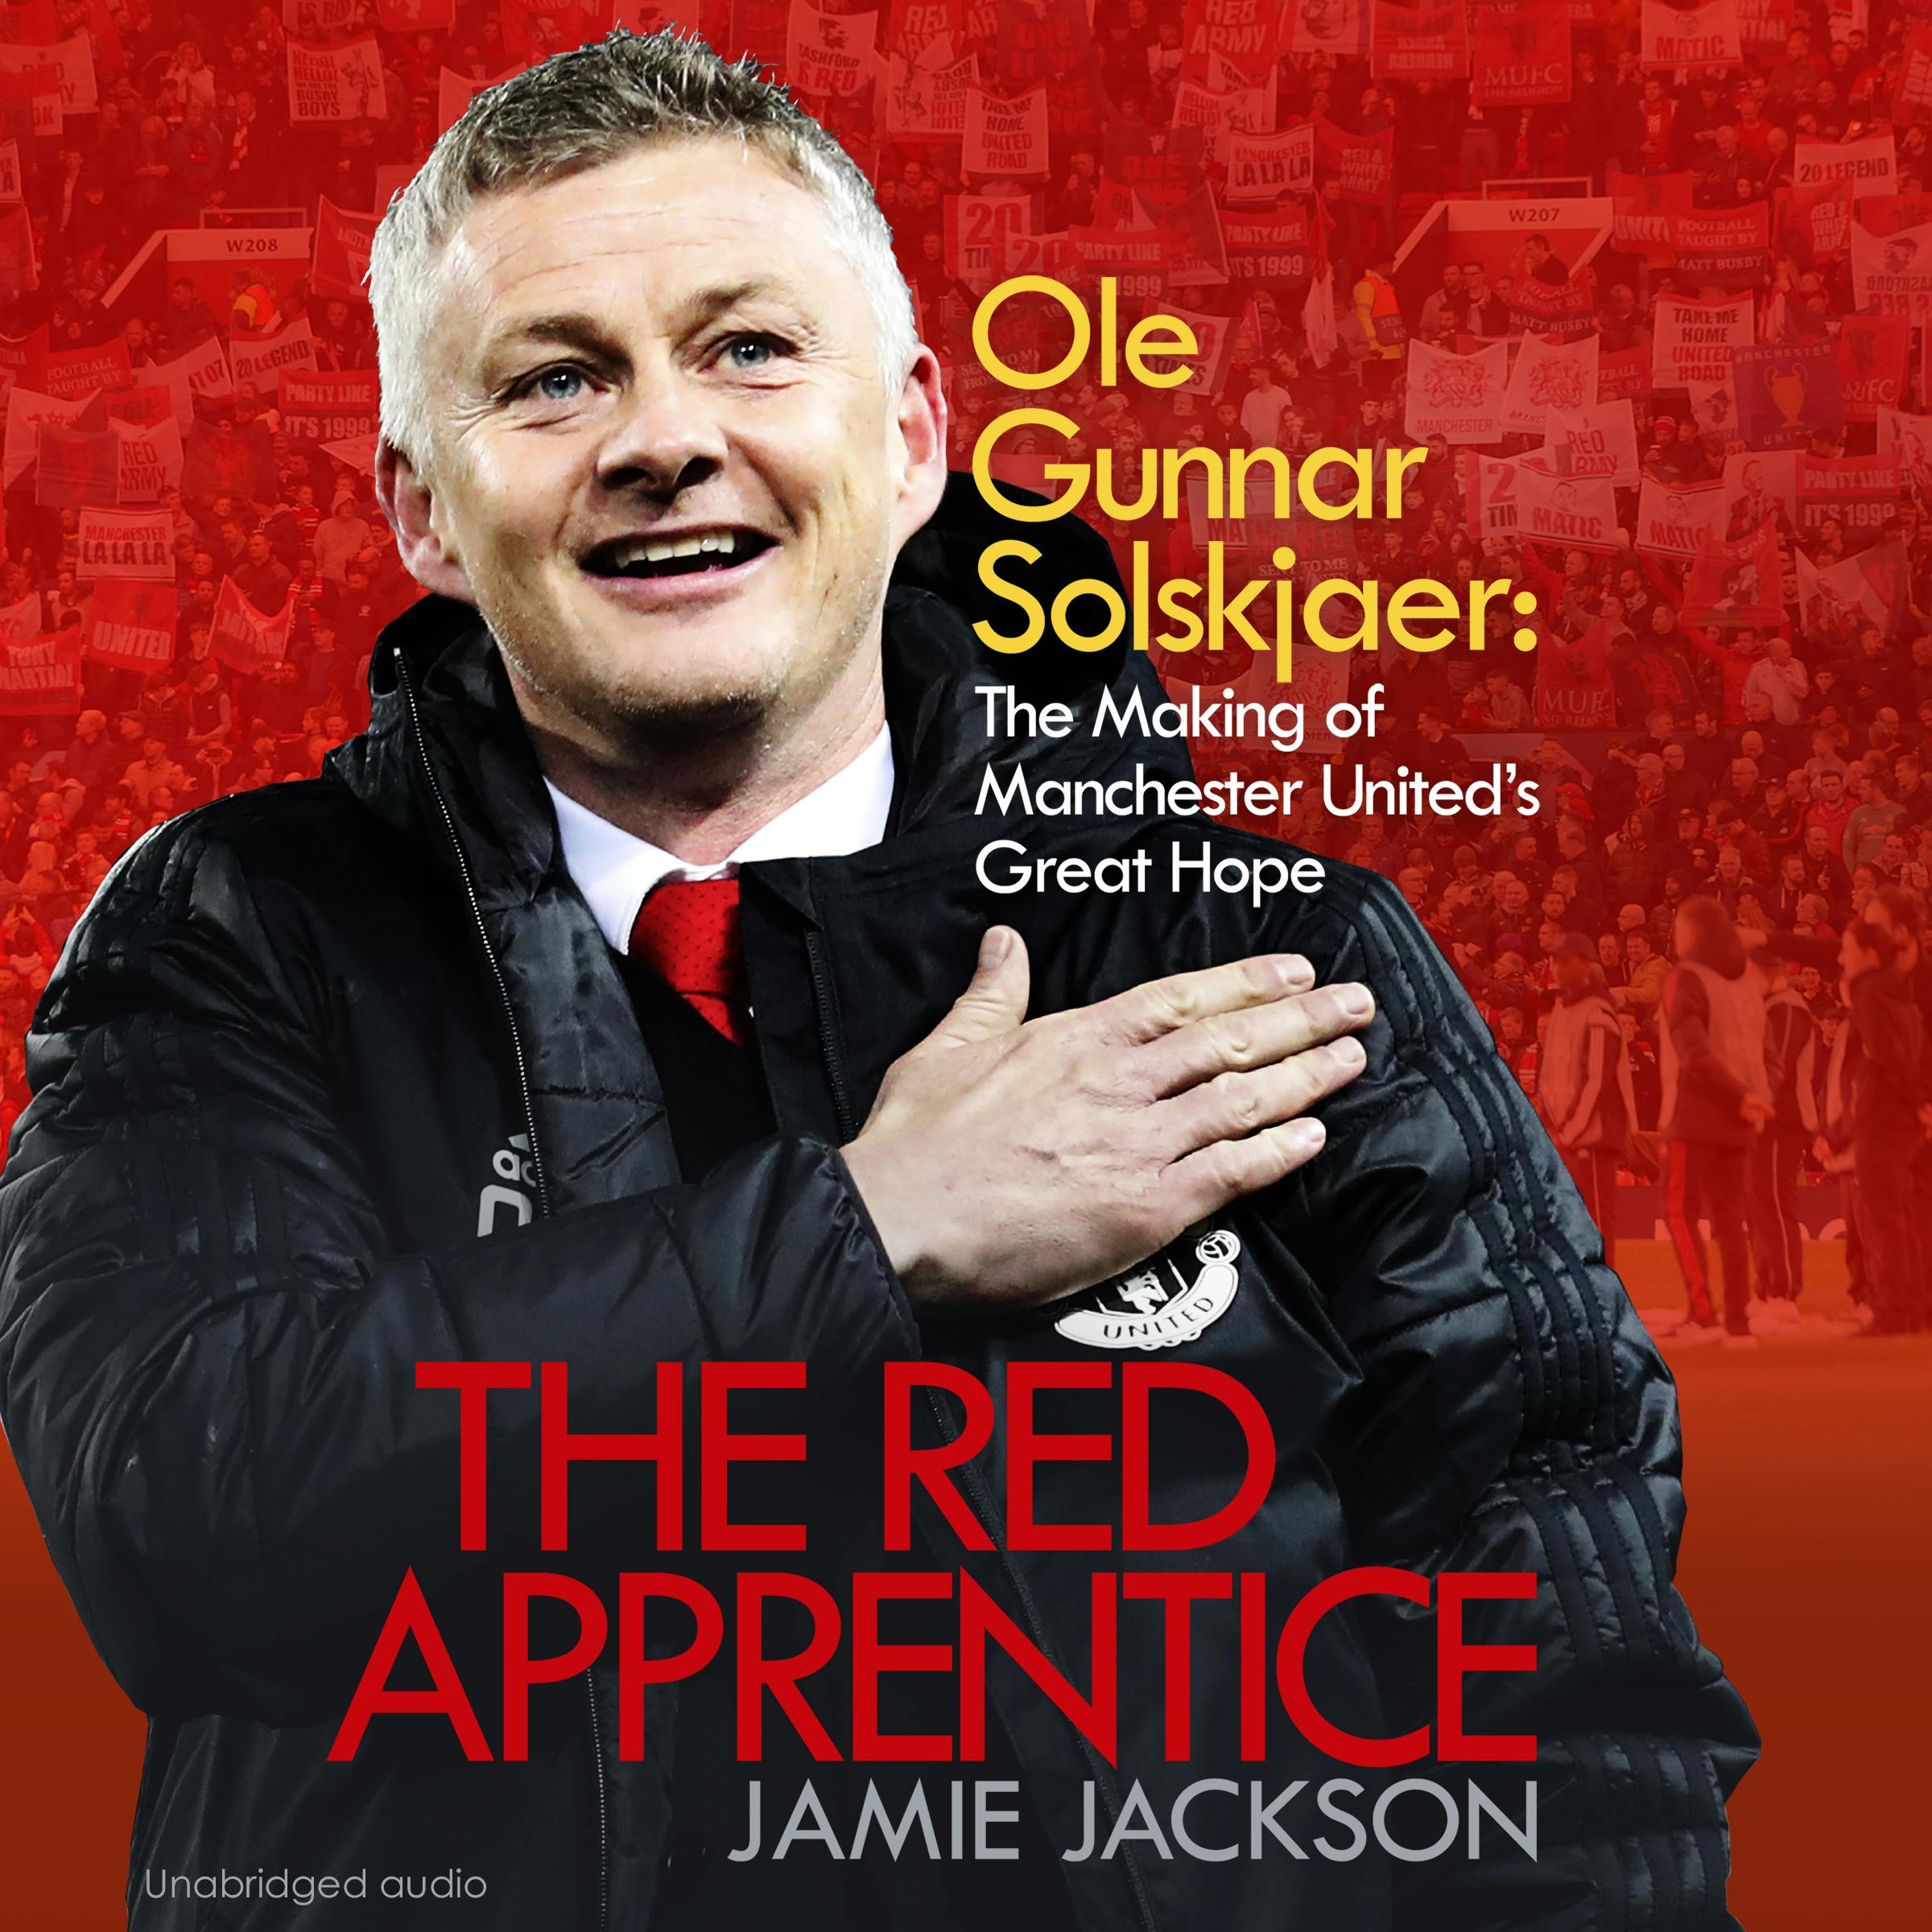 The Red Apprentice: Ole Gunnar Solskjaer: The Making of Manchester United's Great Hope - Jamie Jackson